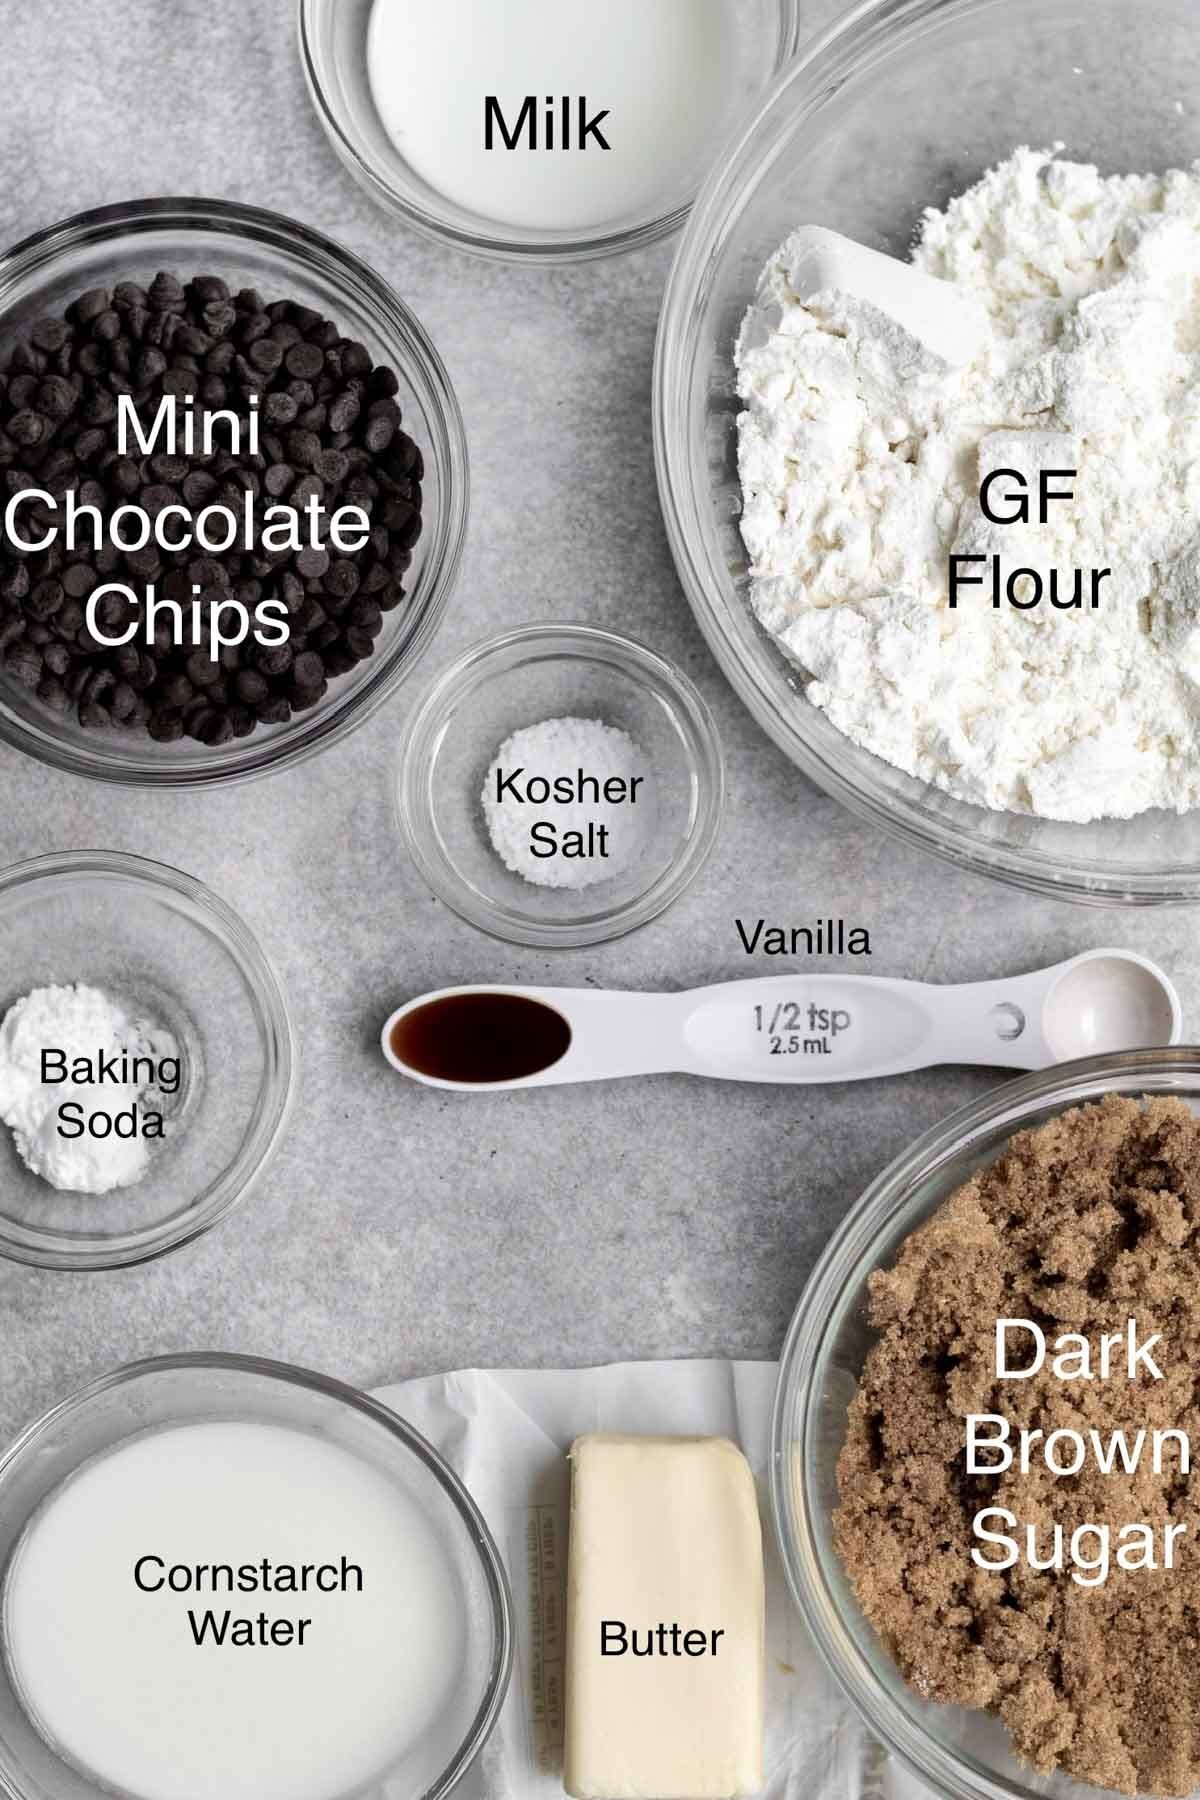 All the ingredients in separate bowls with their text names.